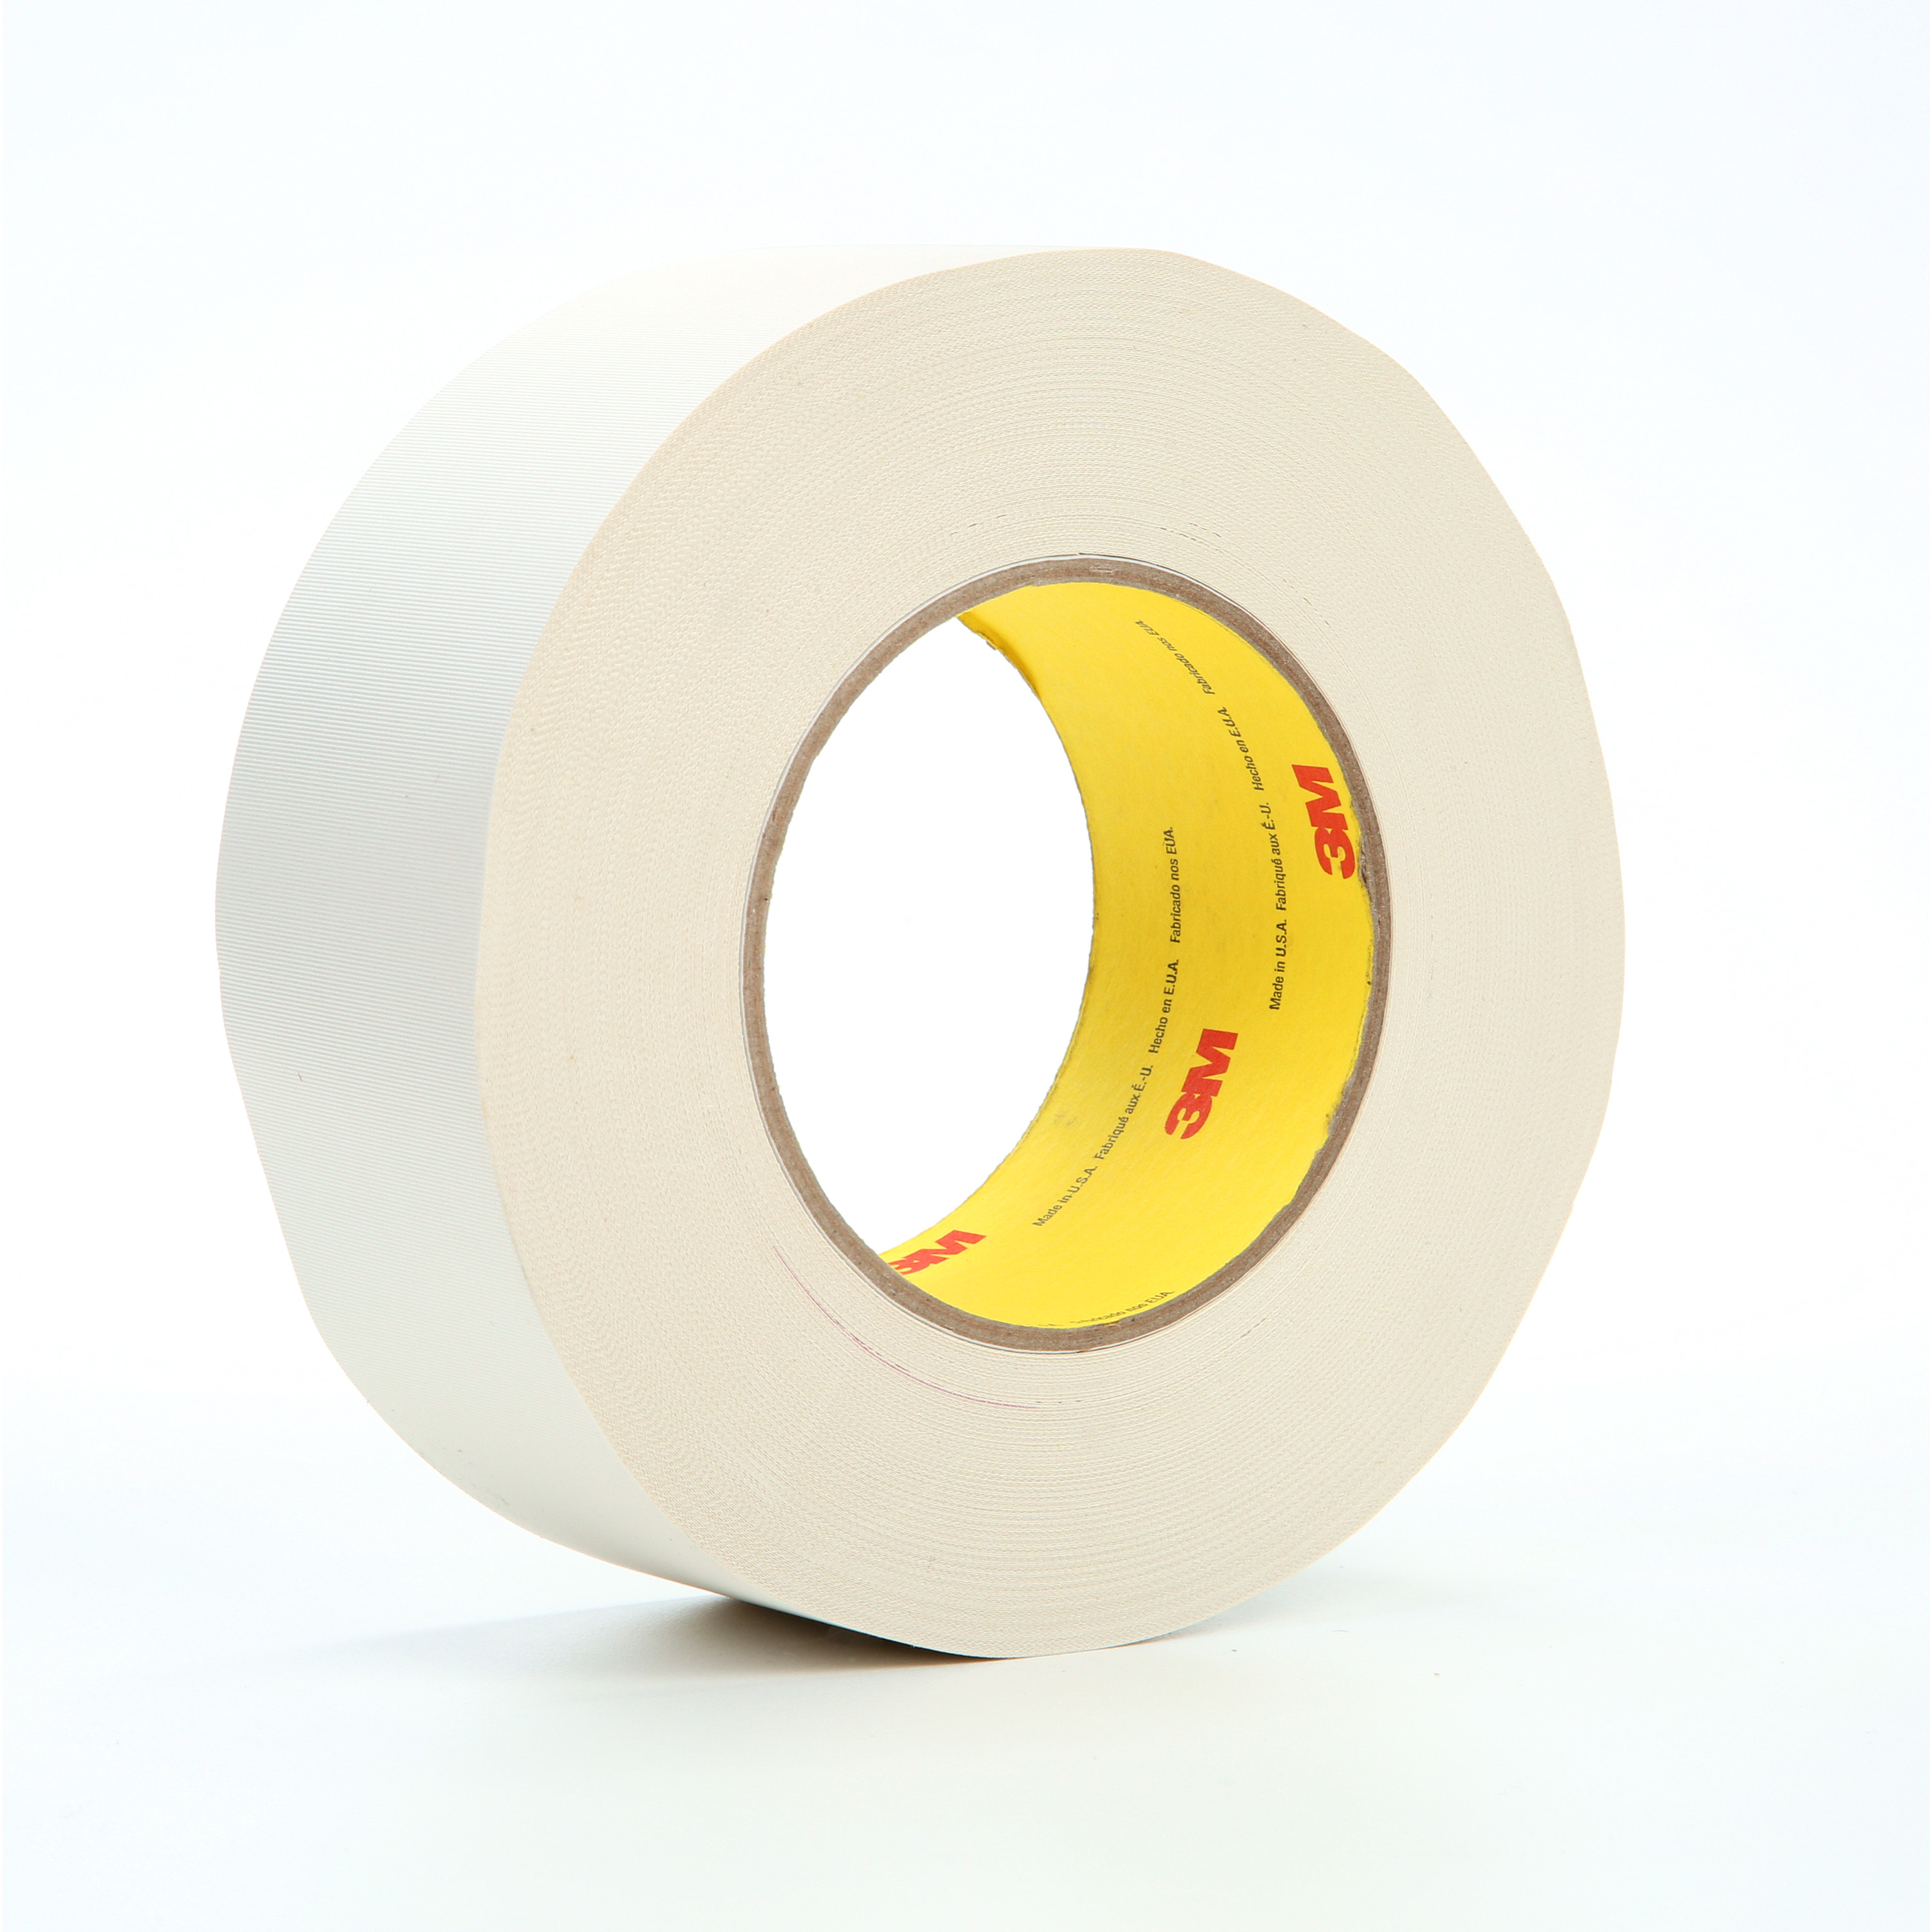 3M™ Thermosetable Glass Cloth Tape 365, White, 2 in x 60 yd, 8.3 mil, 24
rolls per case